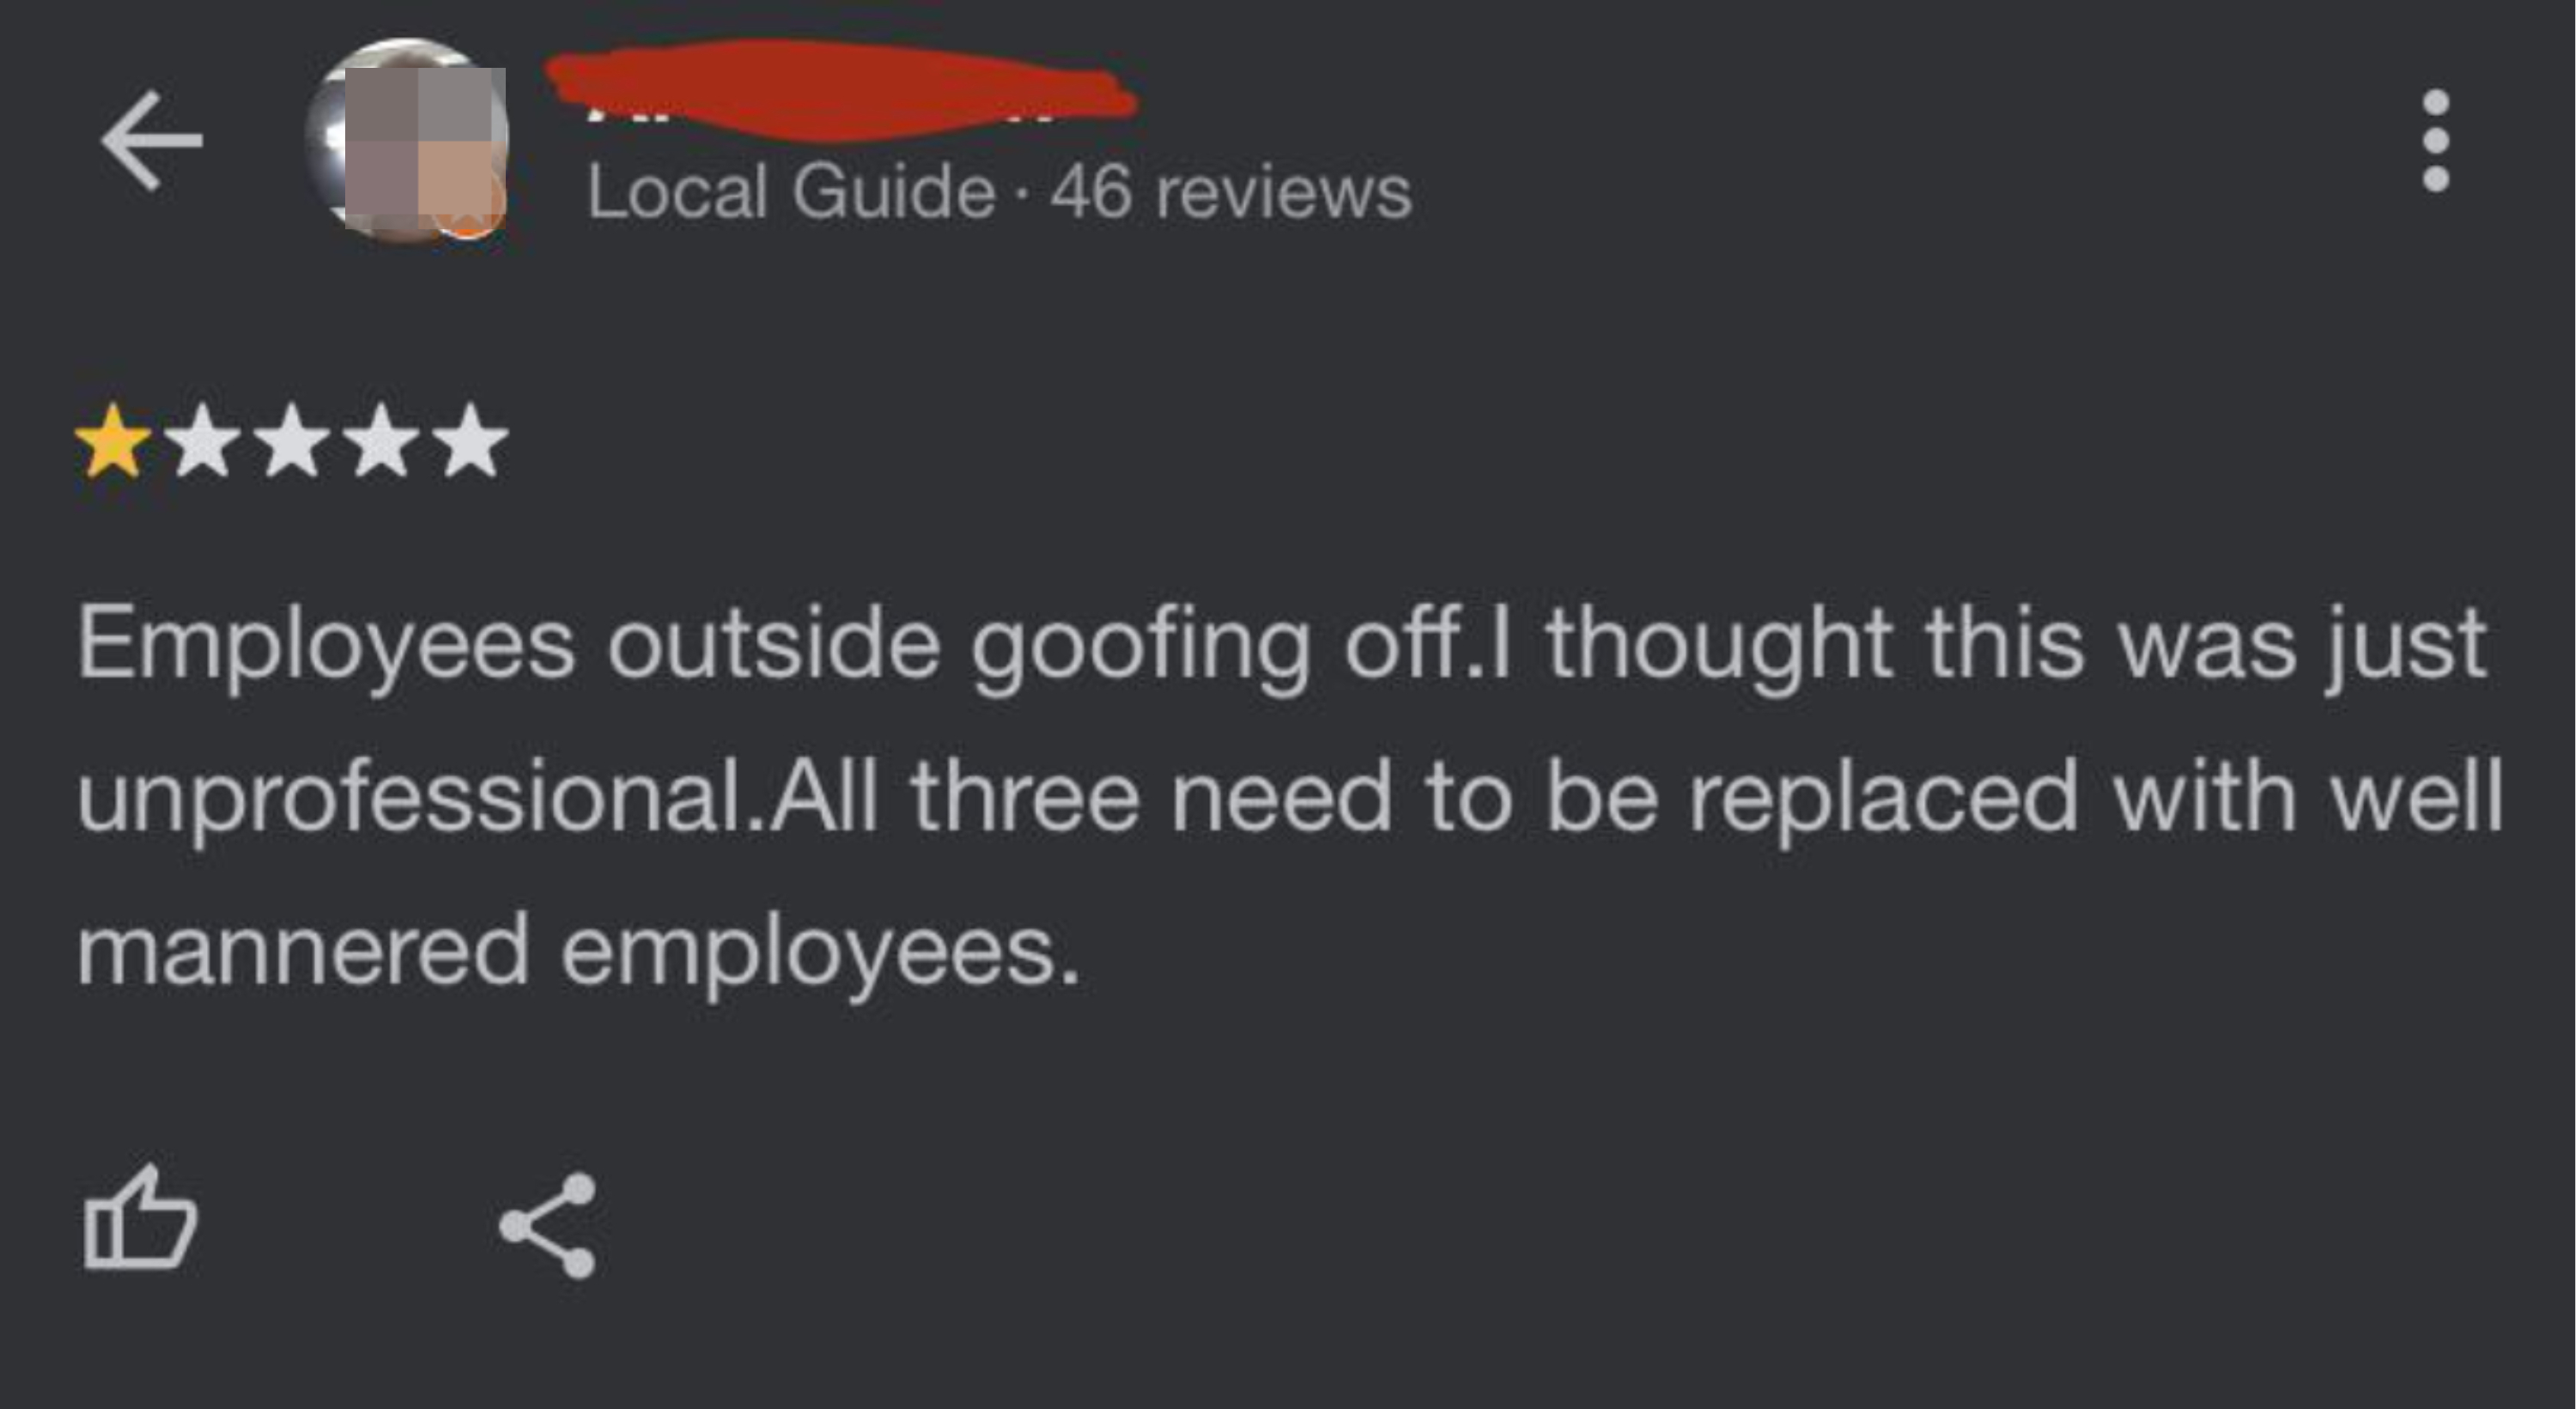 &quot;Employees outside goofing off.&quot;